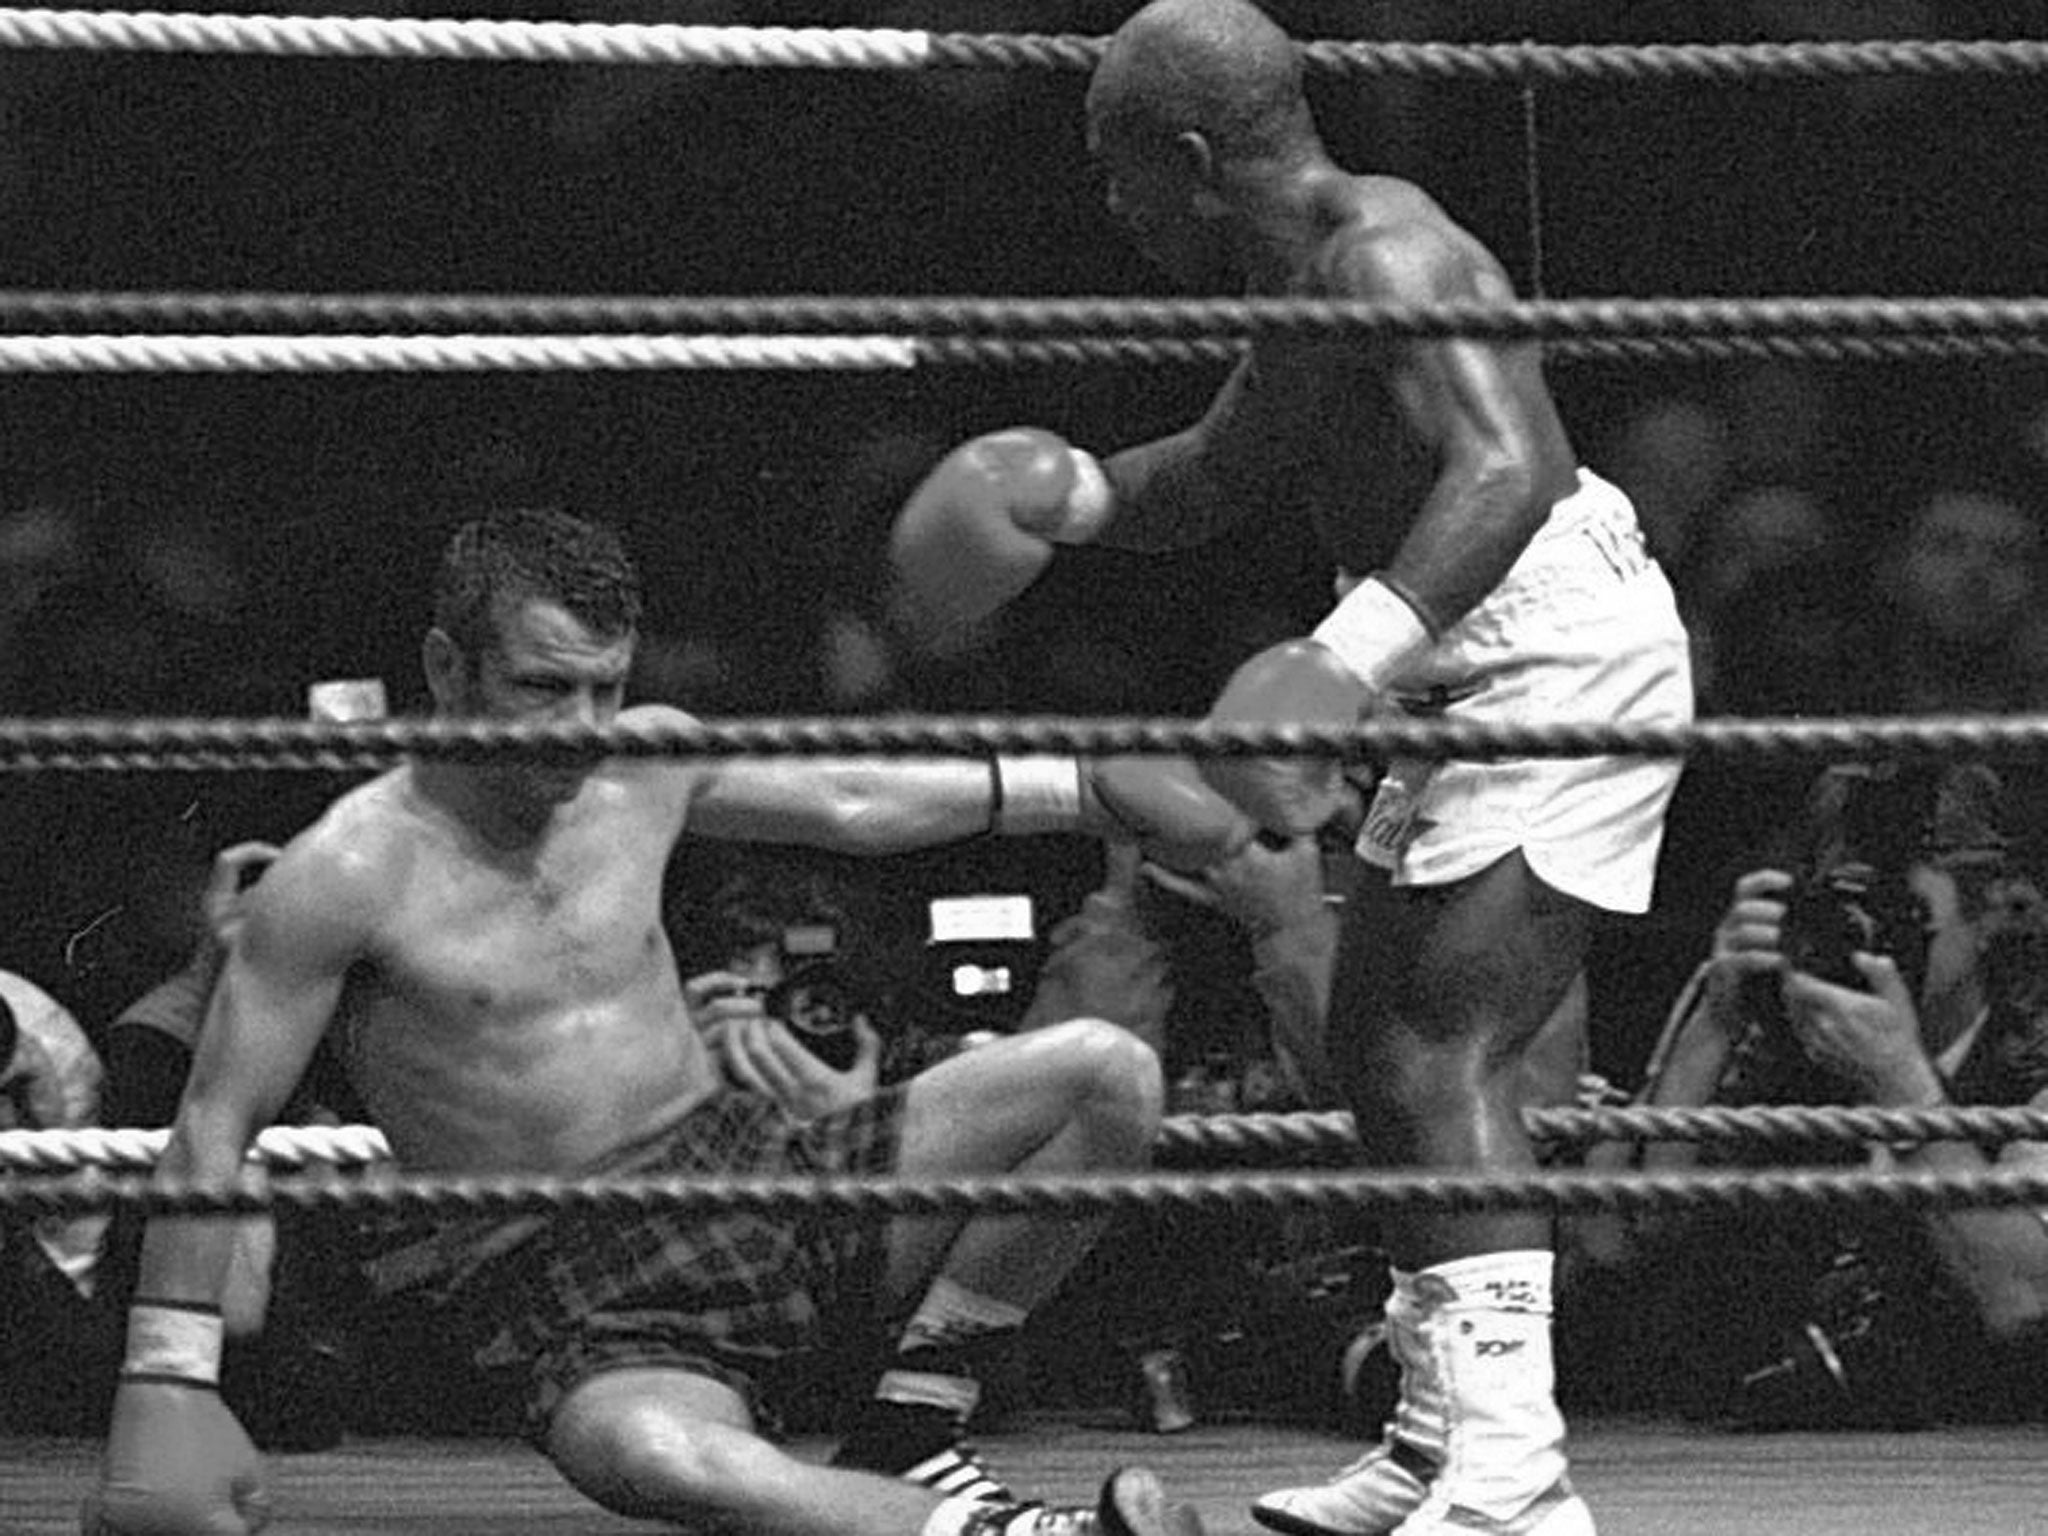 Matlala, right, on his way to victory against Pat Clinton in Glasgow in 1993